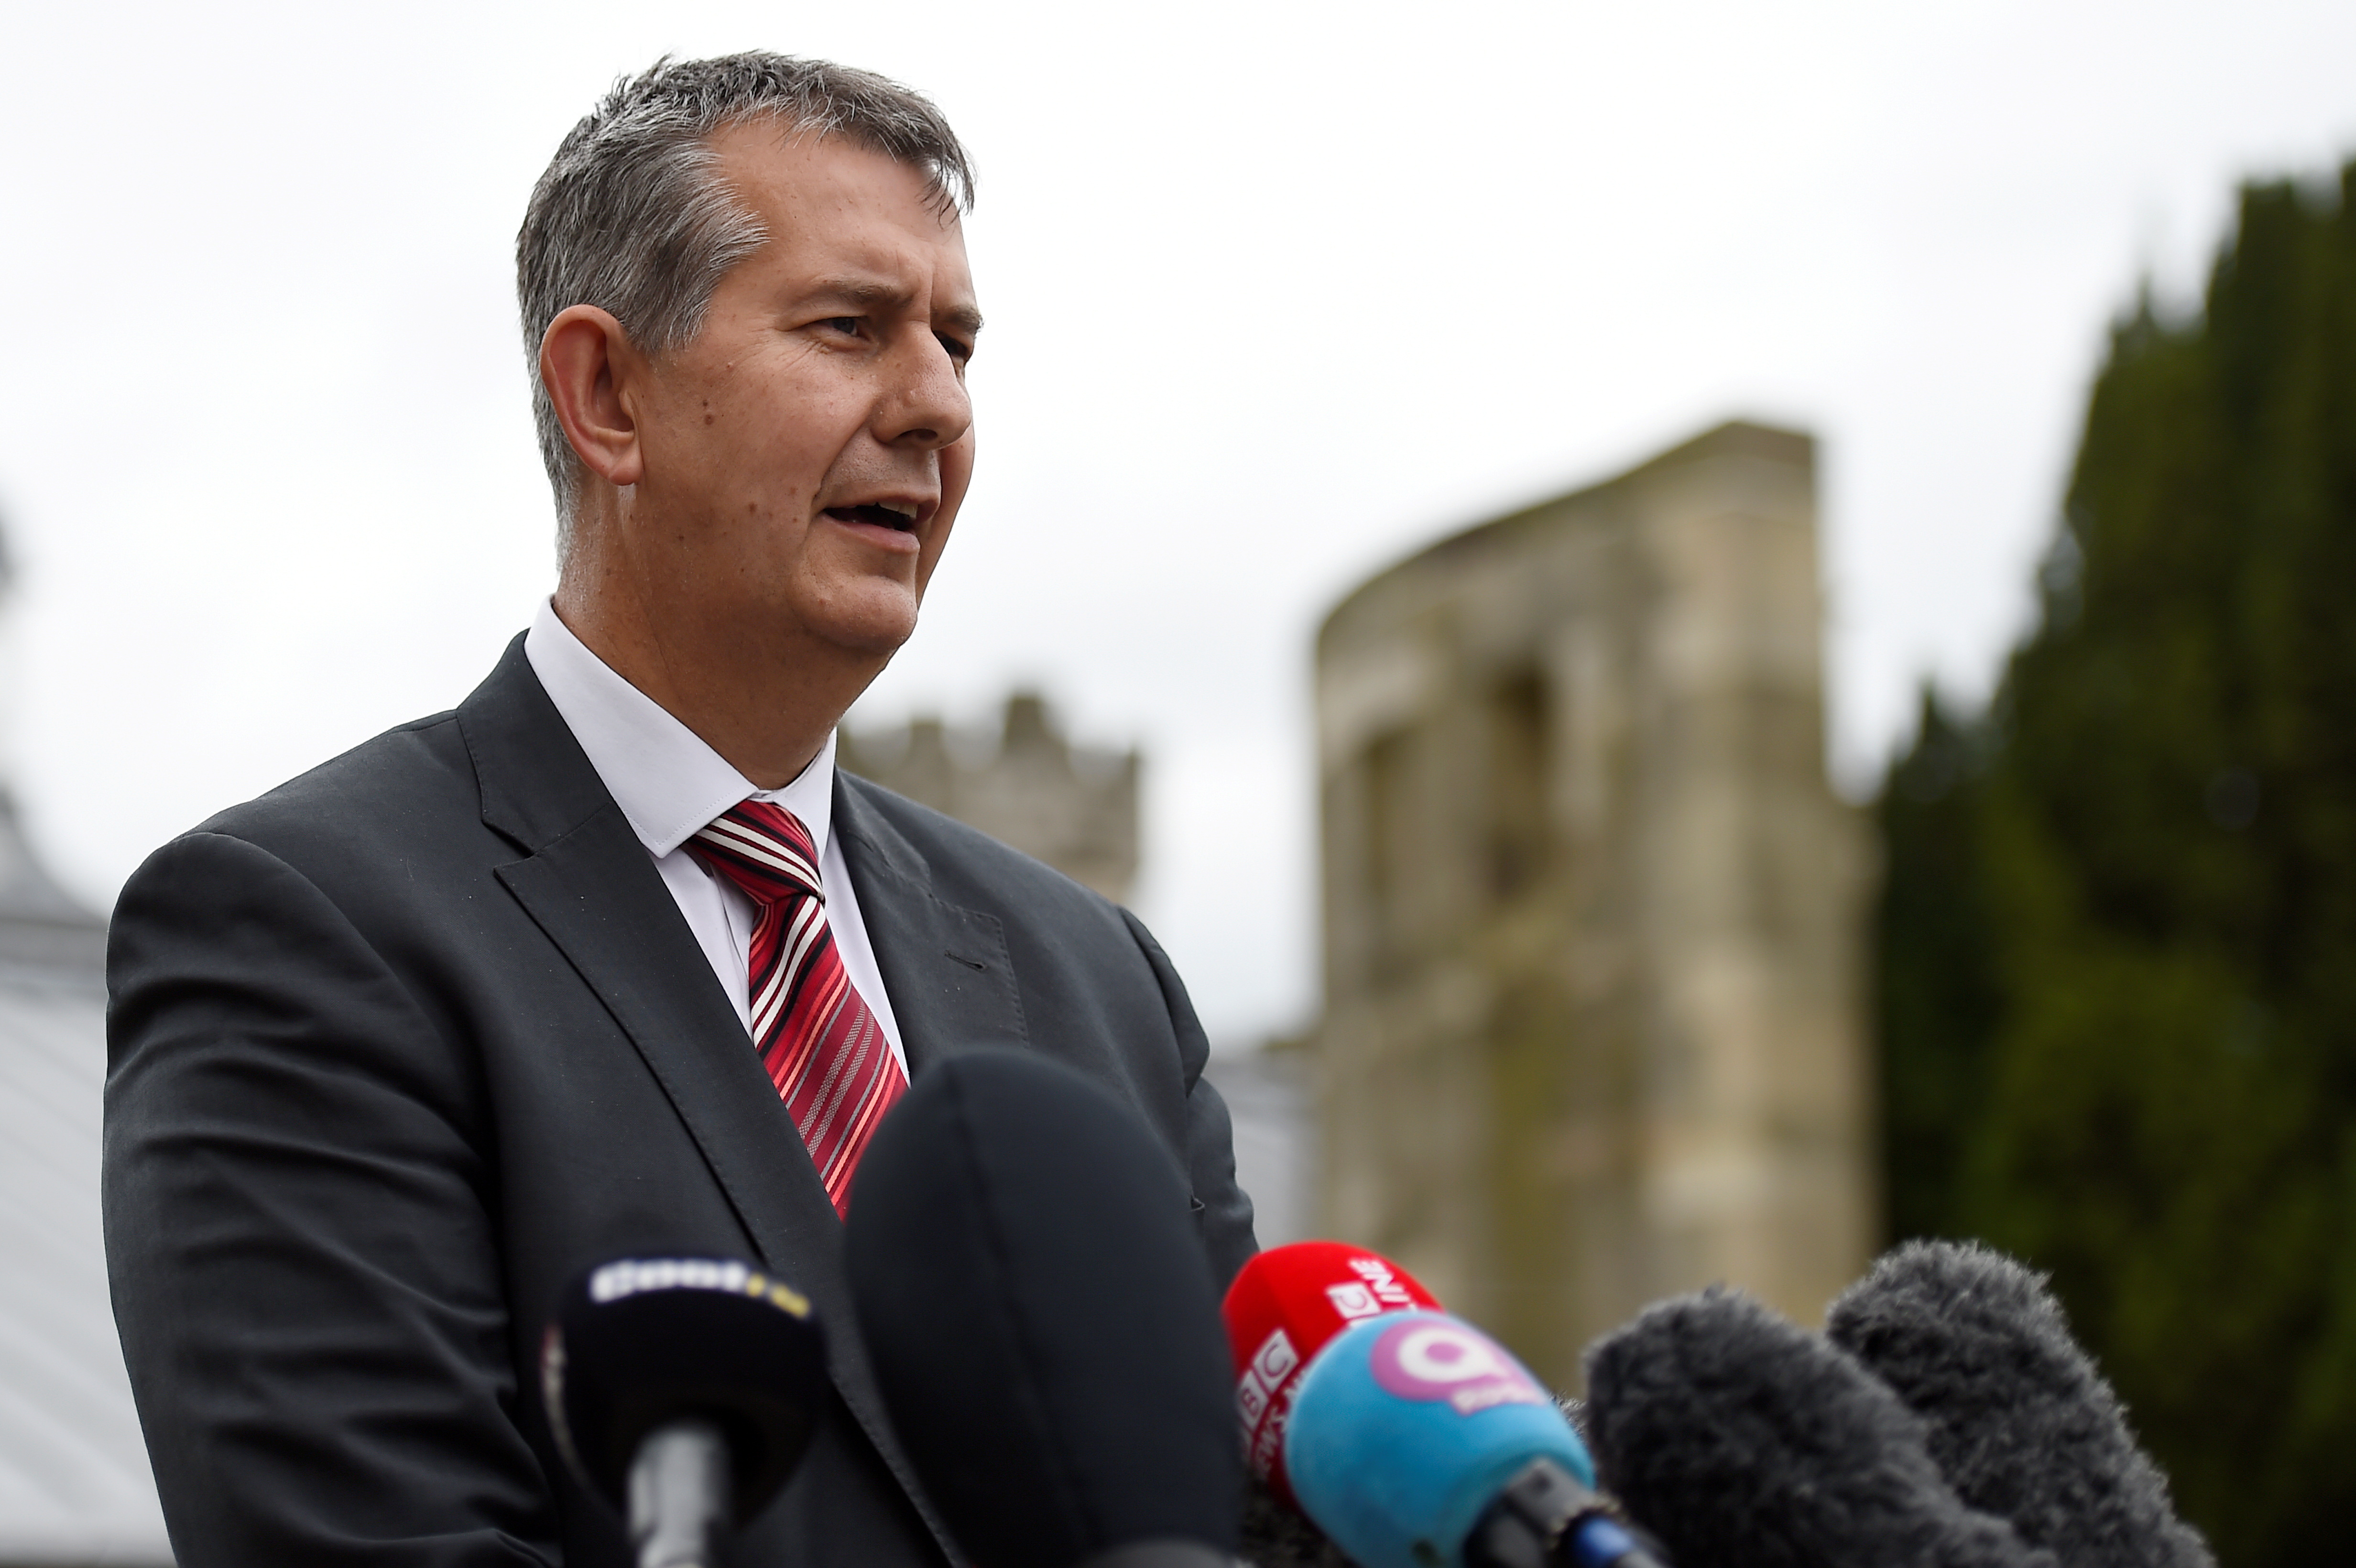 Democratic Unionist Party's (DUP) Edwin Poots makes a statement to the media outside Stormont Castle in Belfast, Northern Ireland June 28, 2017. REUTERS/Clodagh Kilcoyne/File Photo